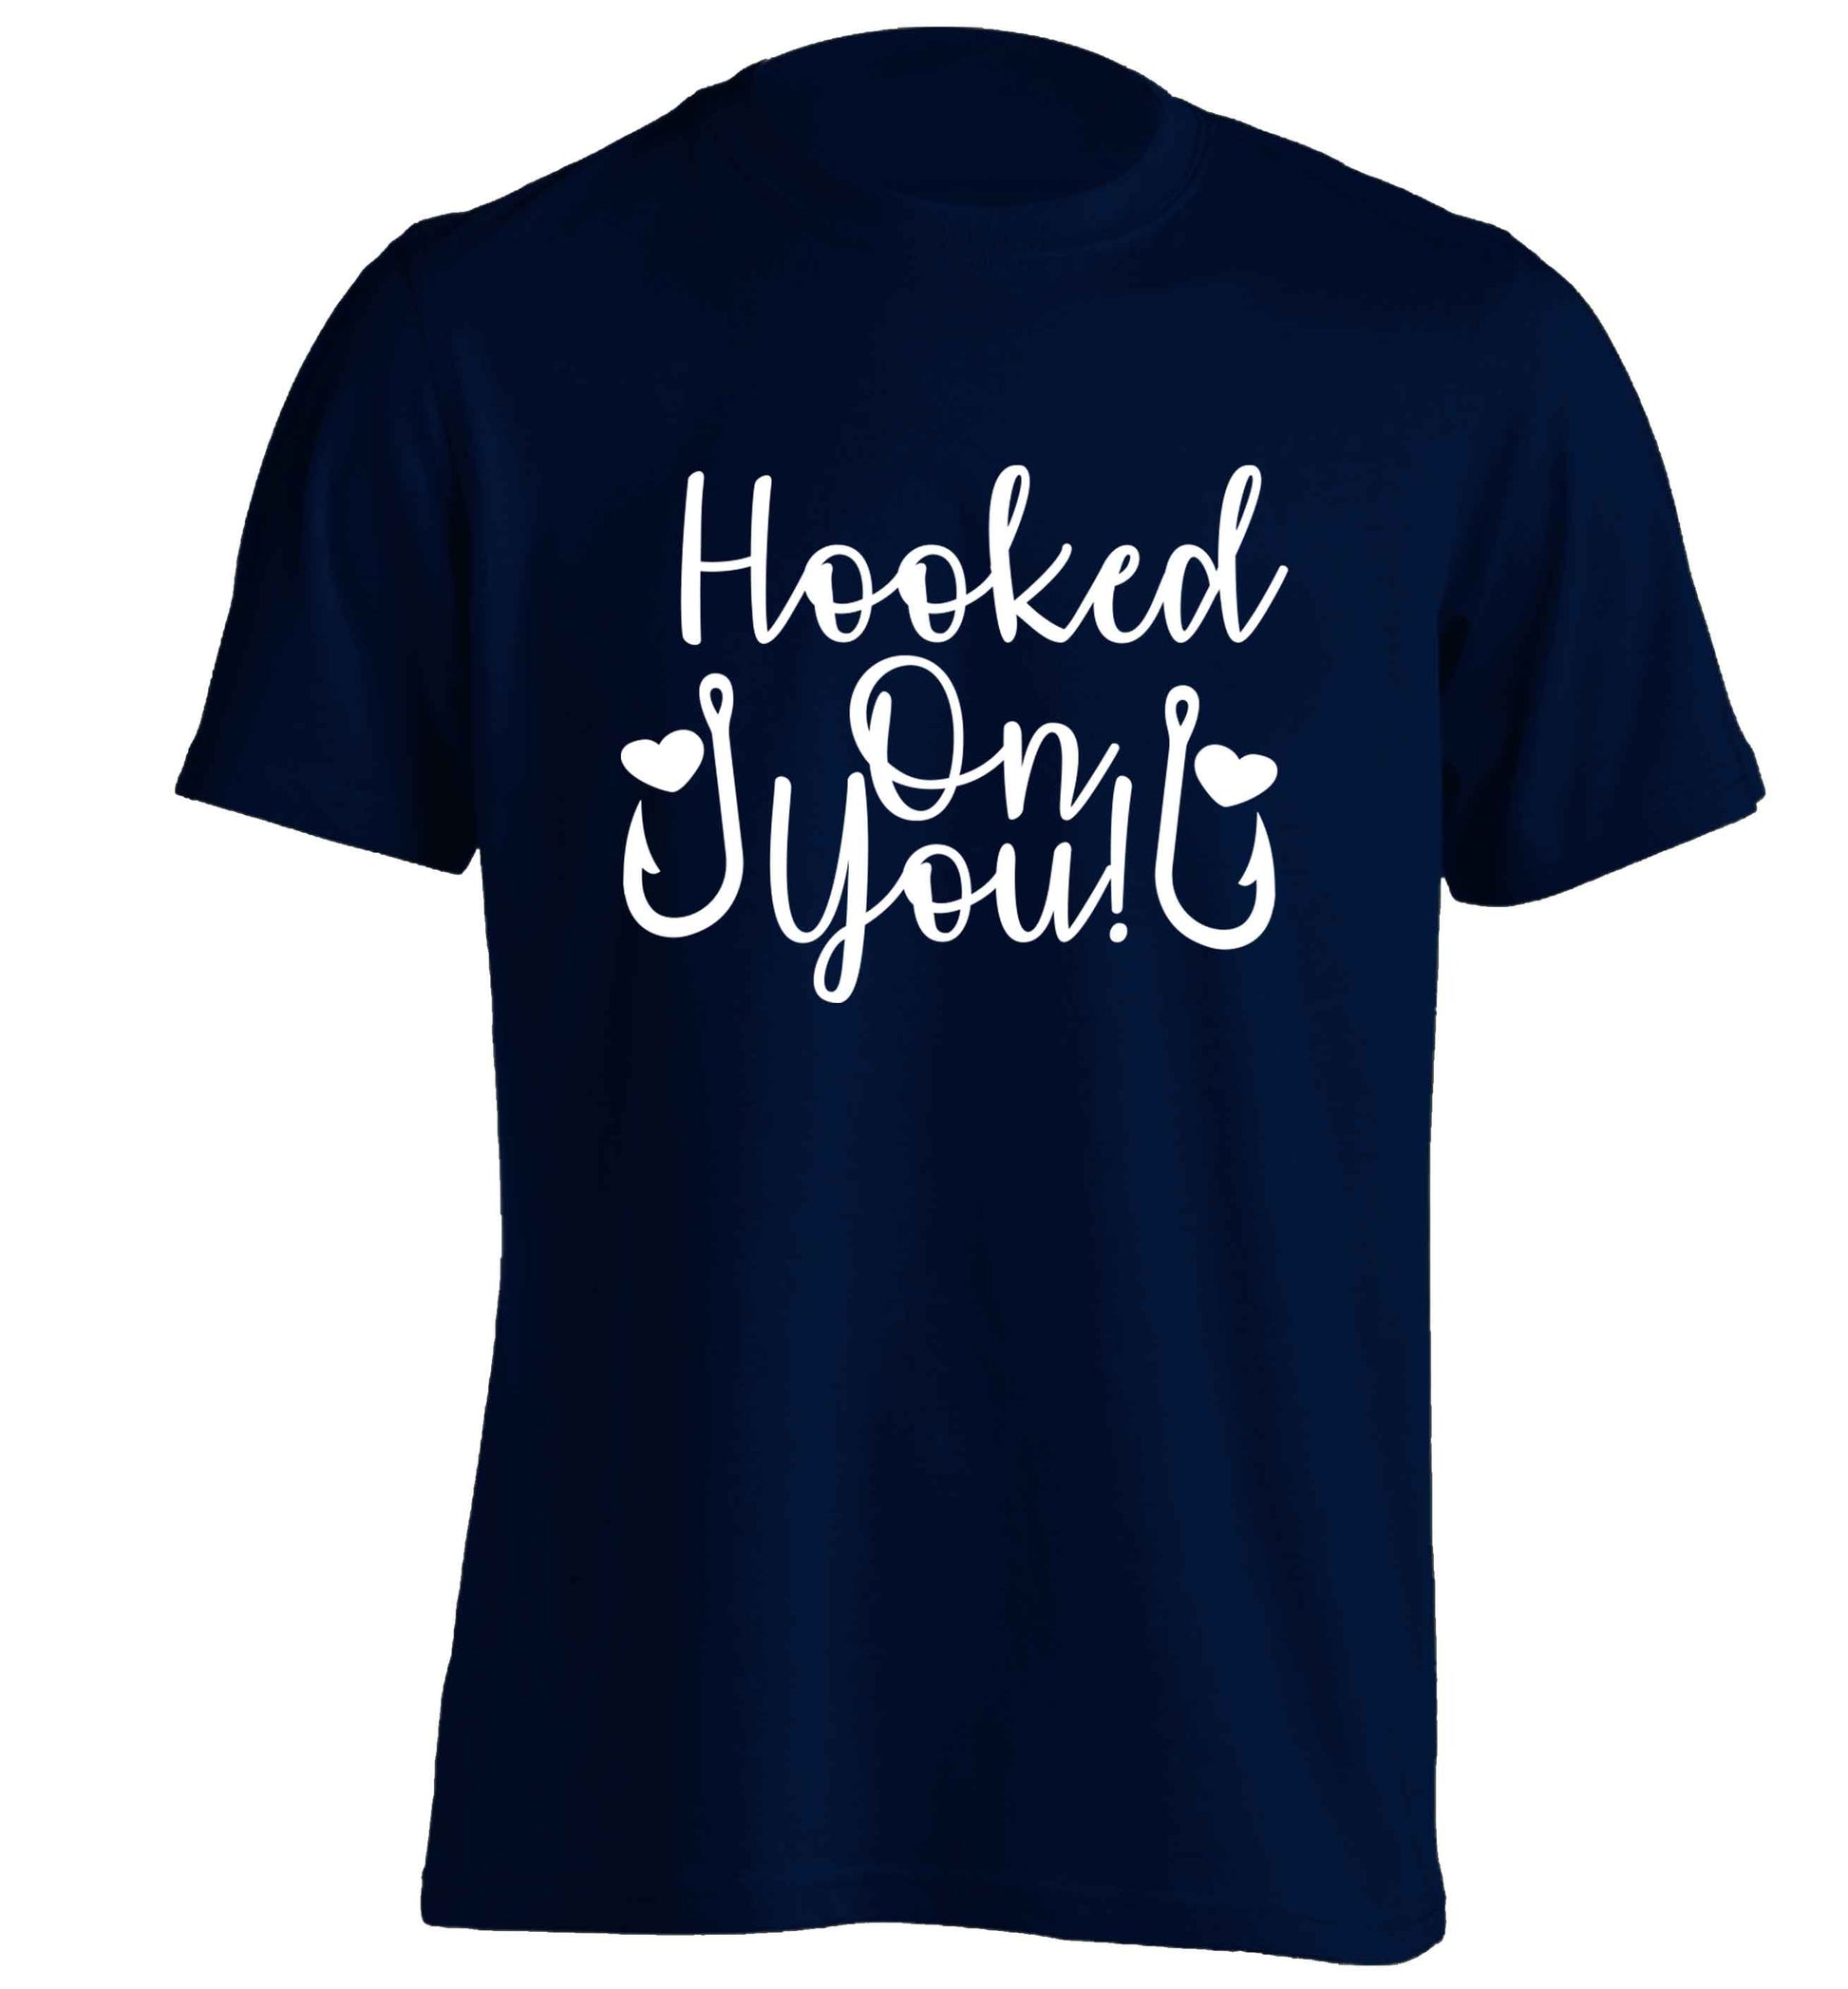 Hooked on you adults unisex navy Tshirt 2XL